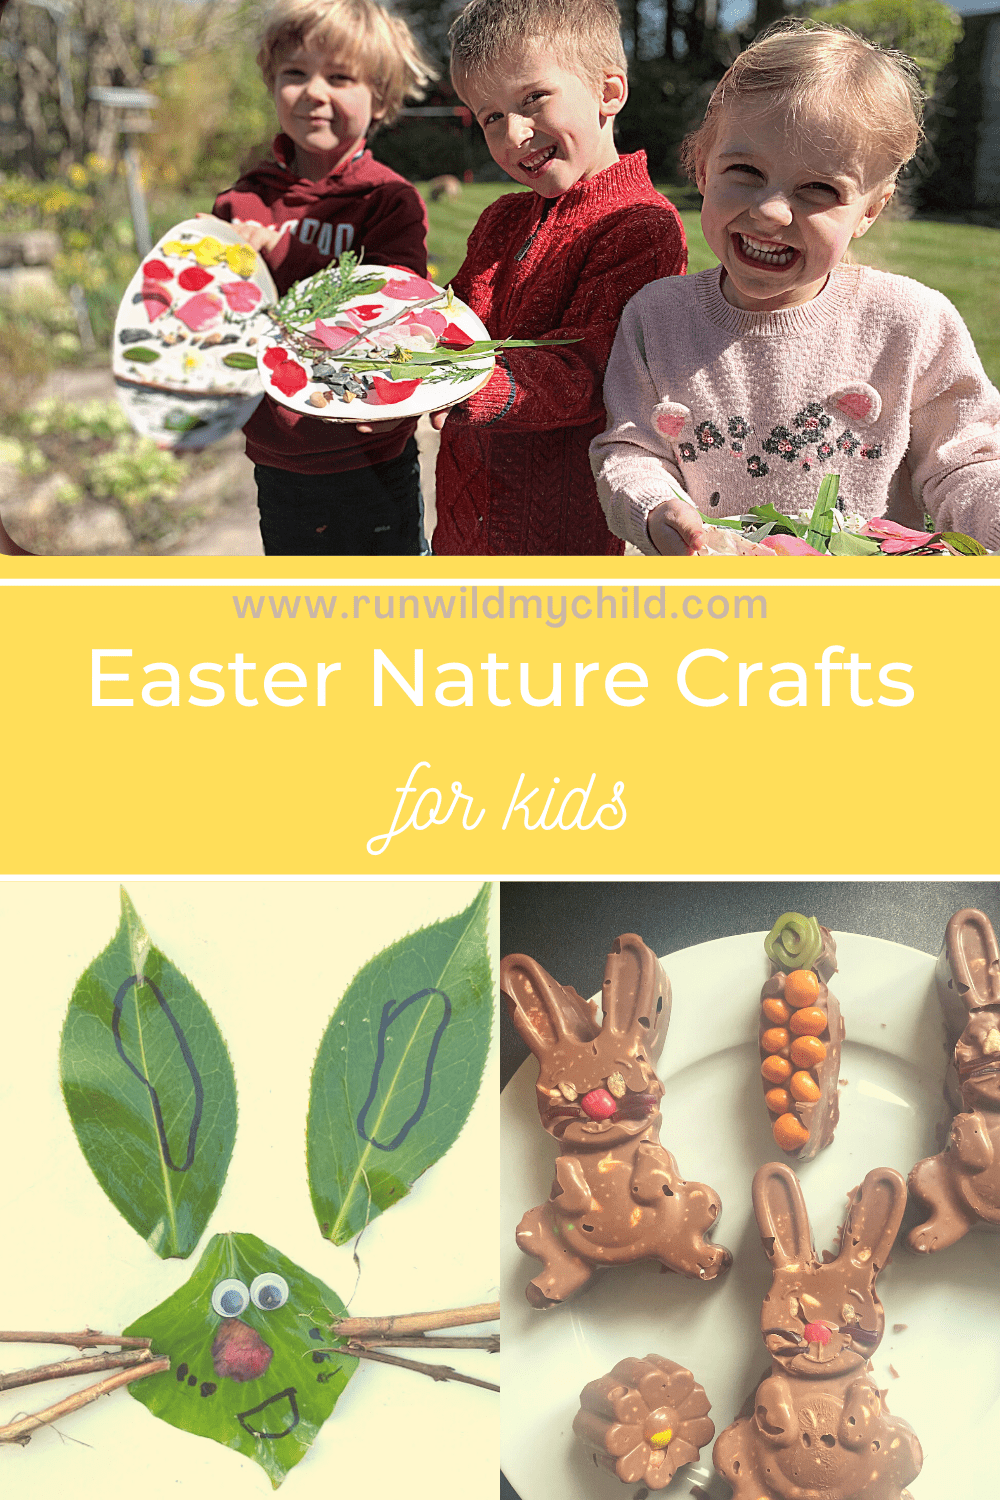 Crafts and Activities for Kids  Nature crafts, Crafts for kids, Craft  projects for kids